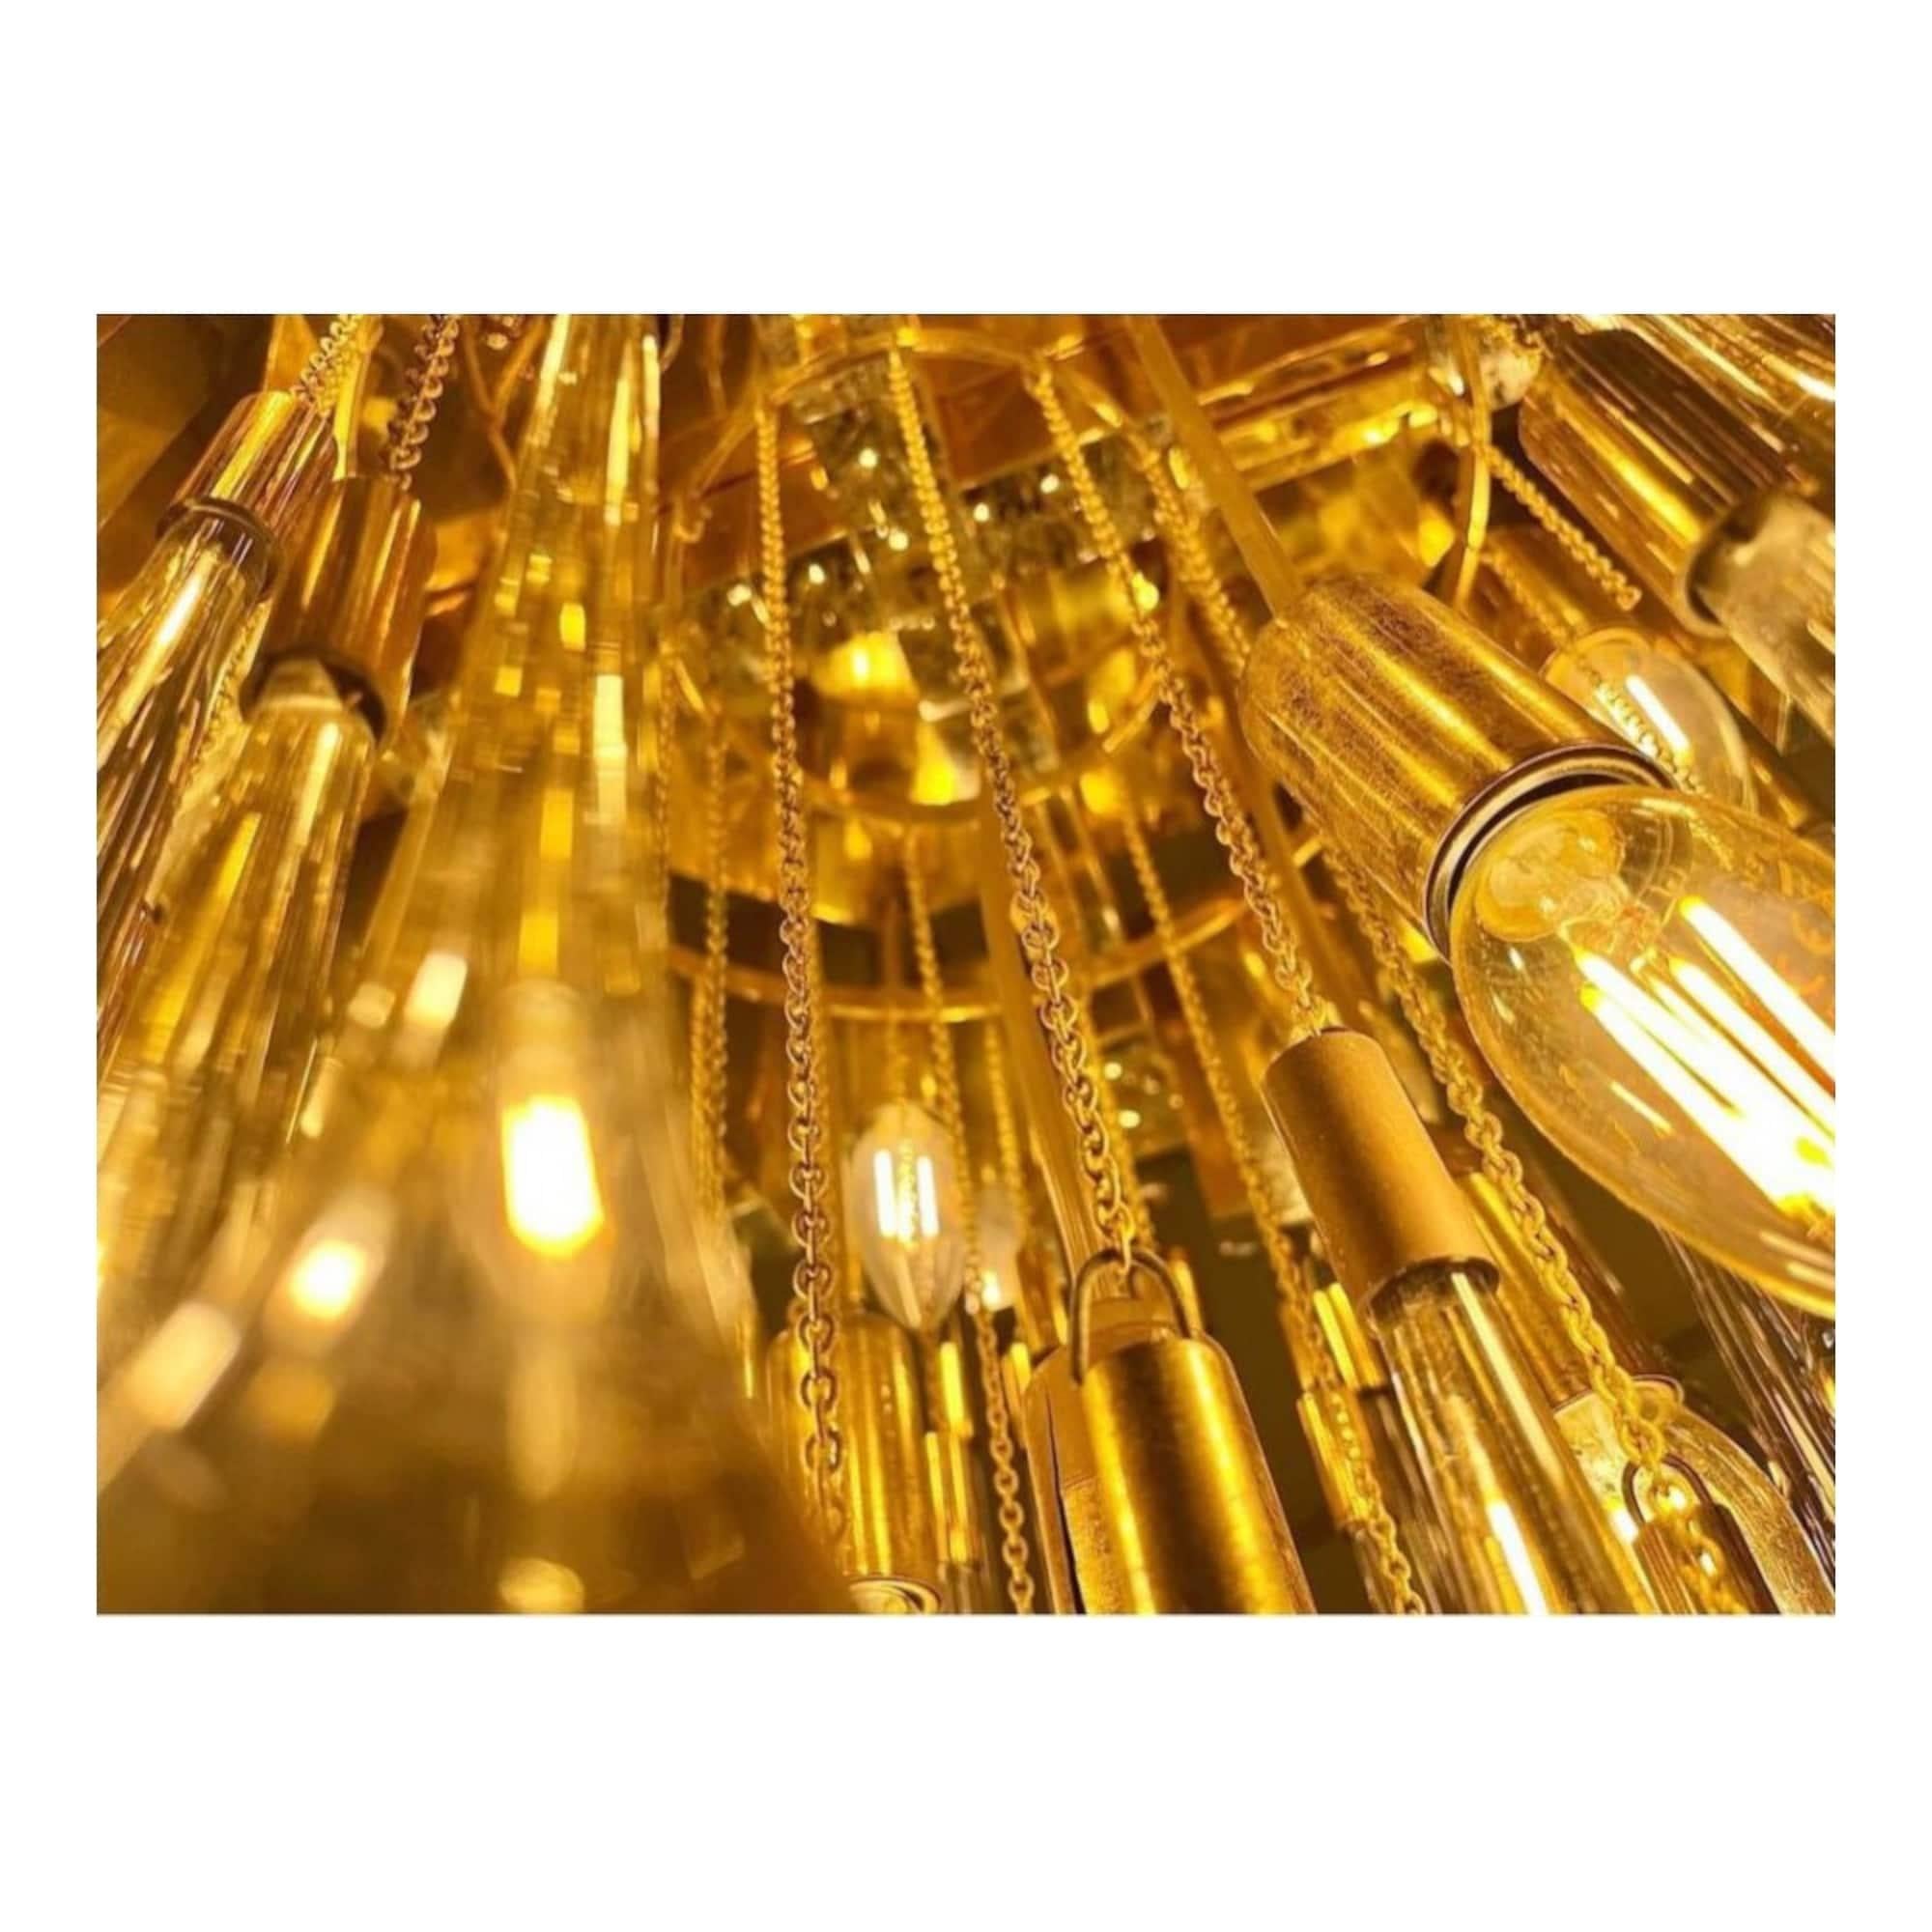 A very impressive Murano glass drop chandelier, with a brass and chrome finish. This stunning Italian antique, dating from the 1970s, will bring a touch of elegance and sophistication to any room. The chandelier's exquisite details are highlighted